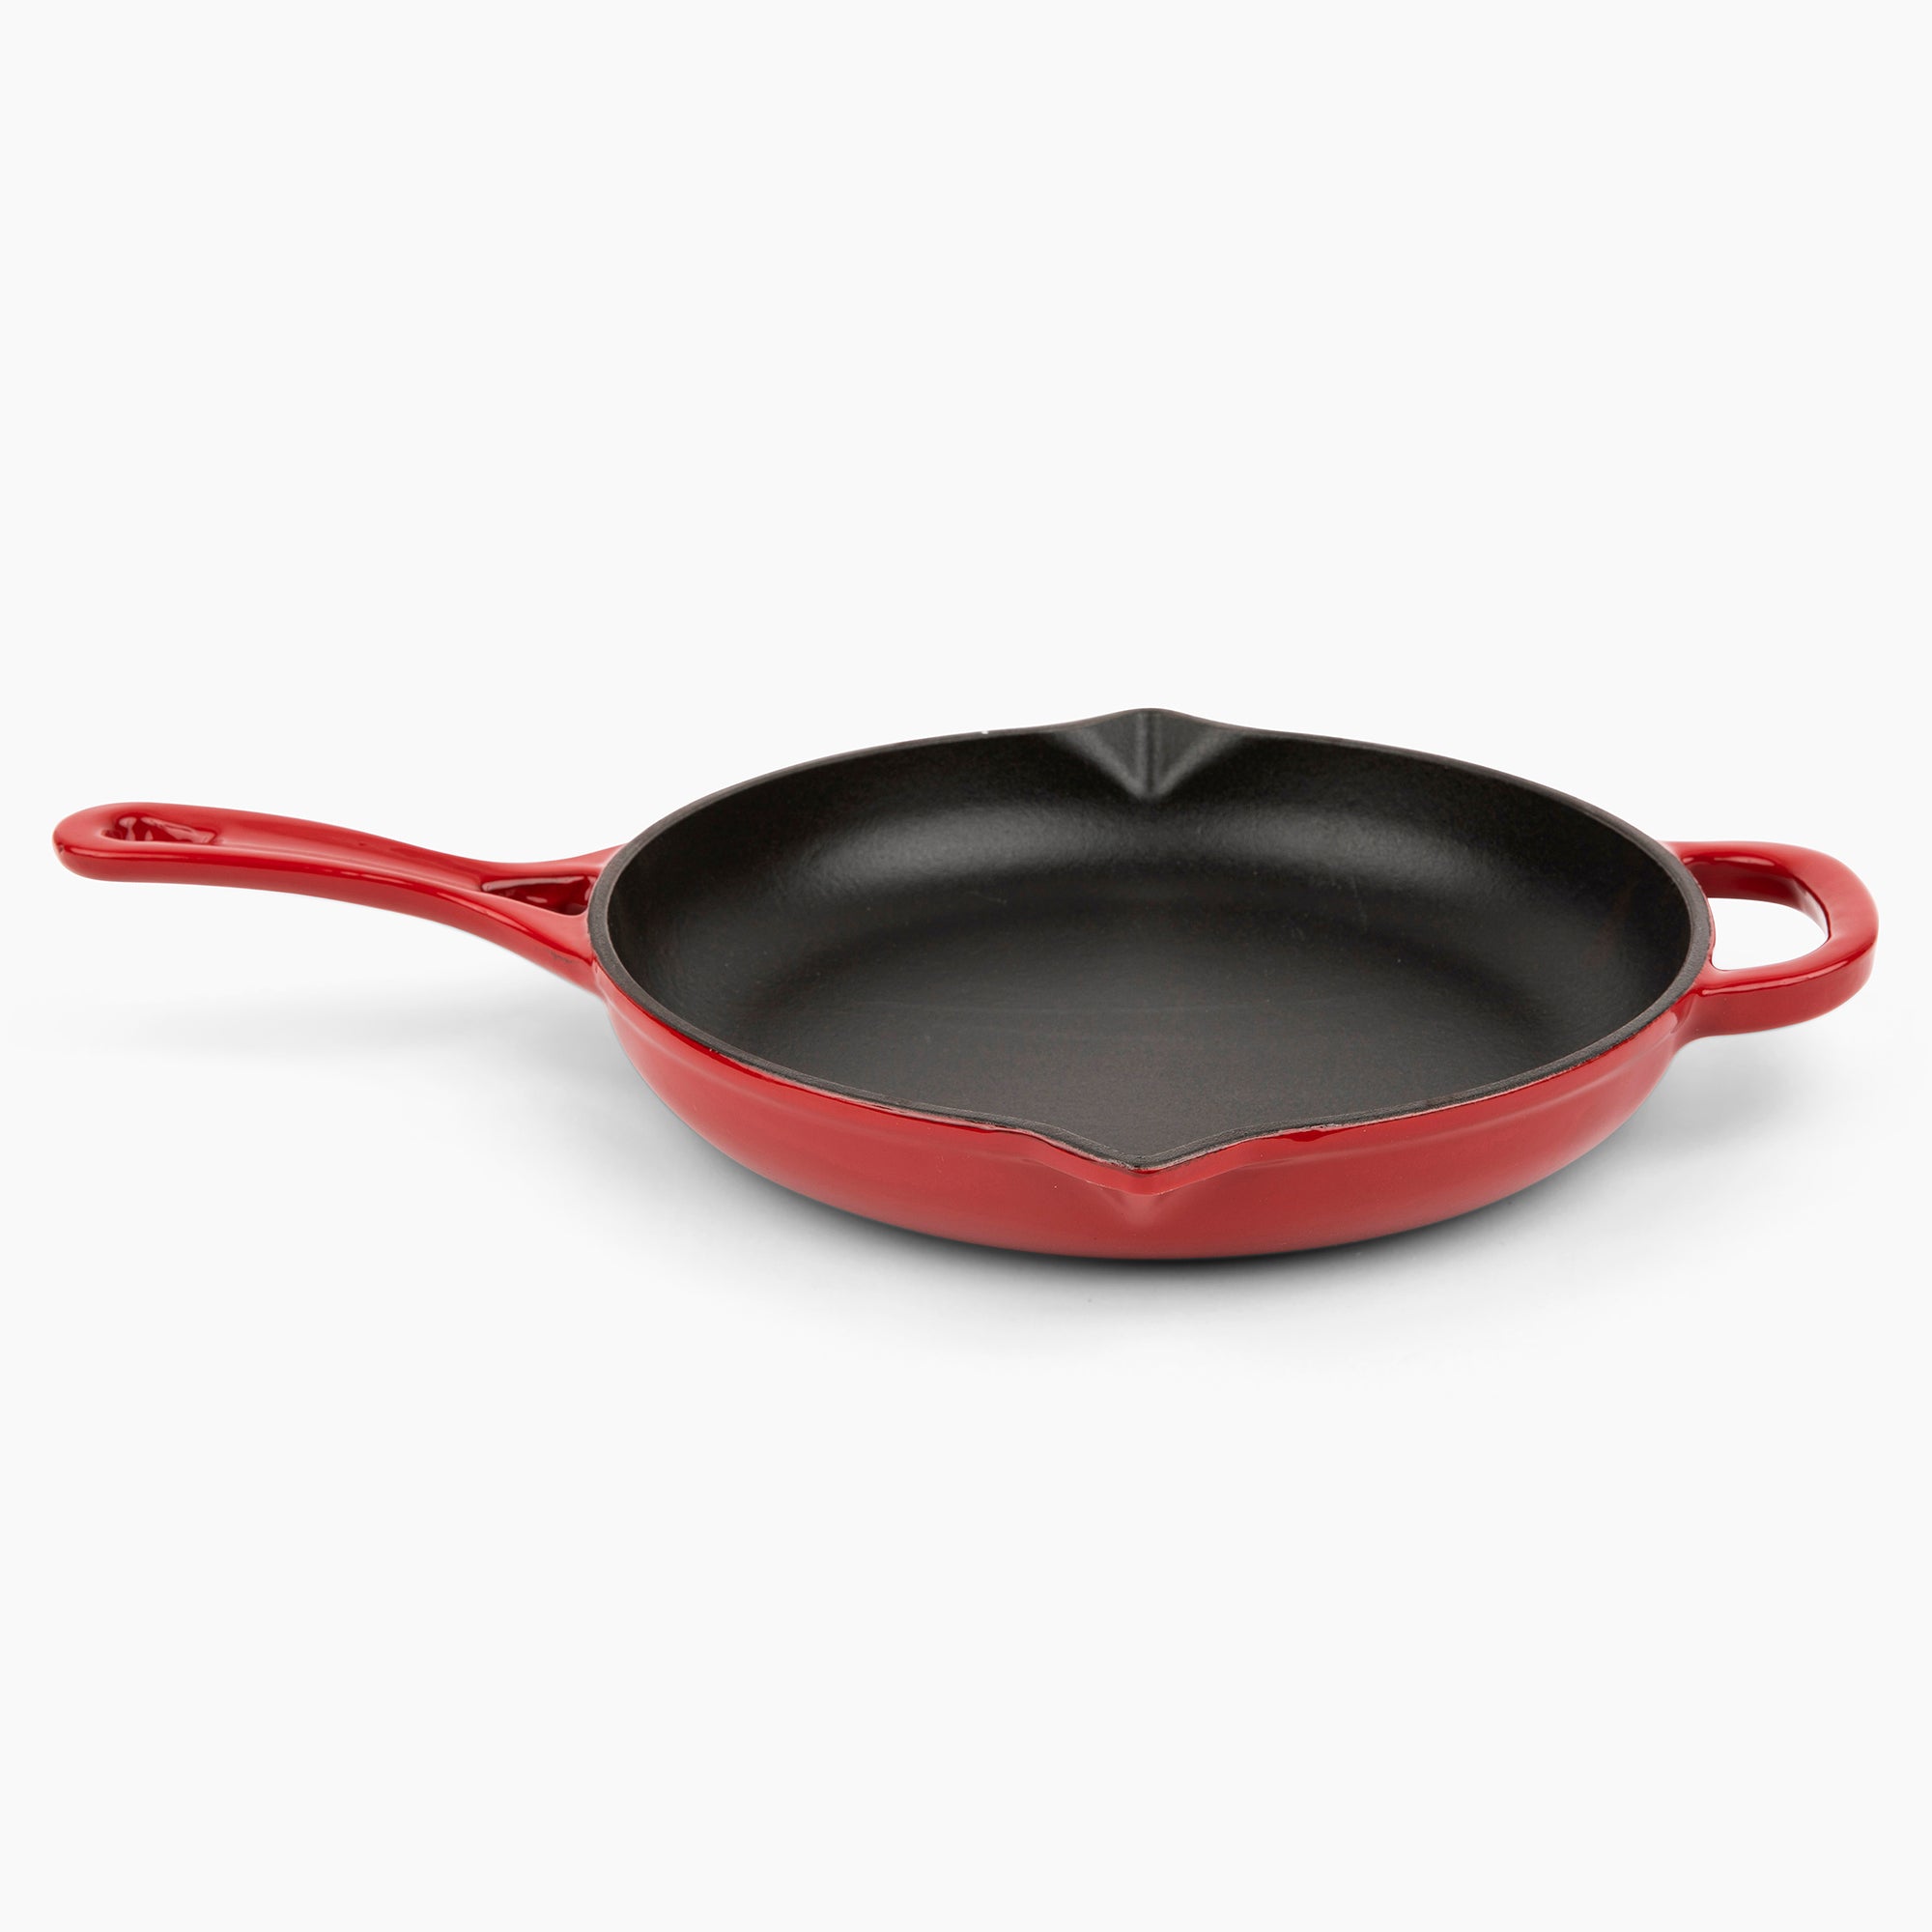 Cast Iron Skillet - 10.25” Dimensions & Drawings